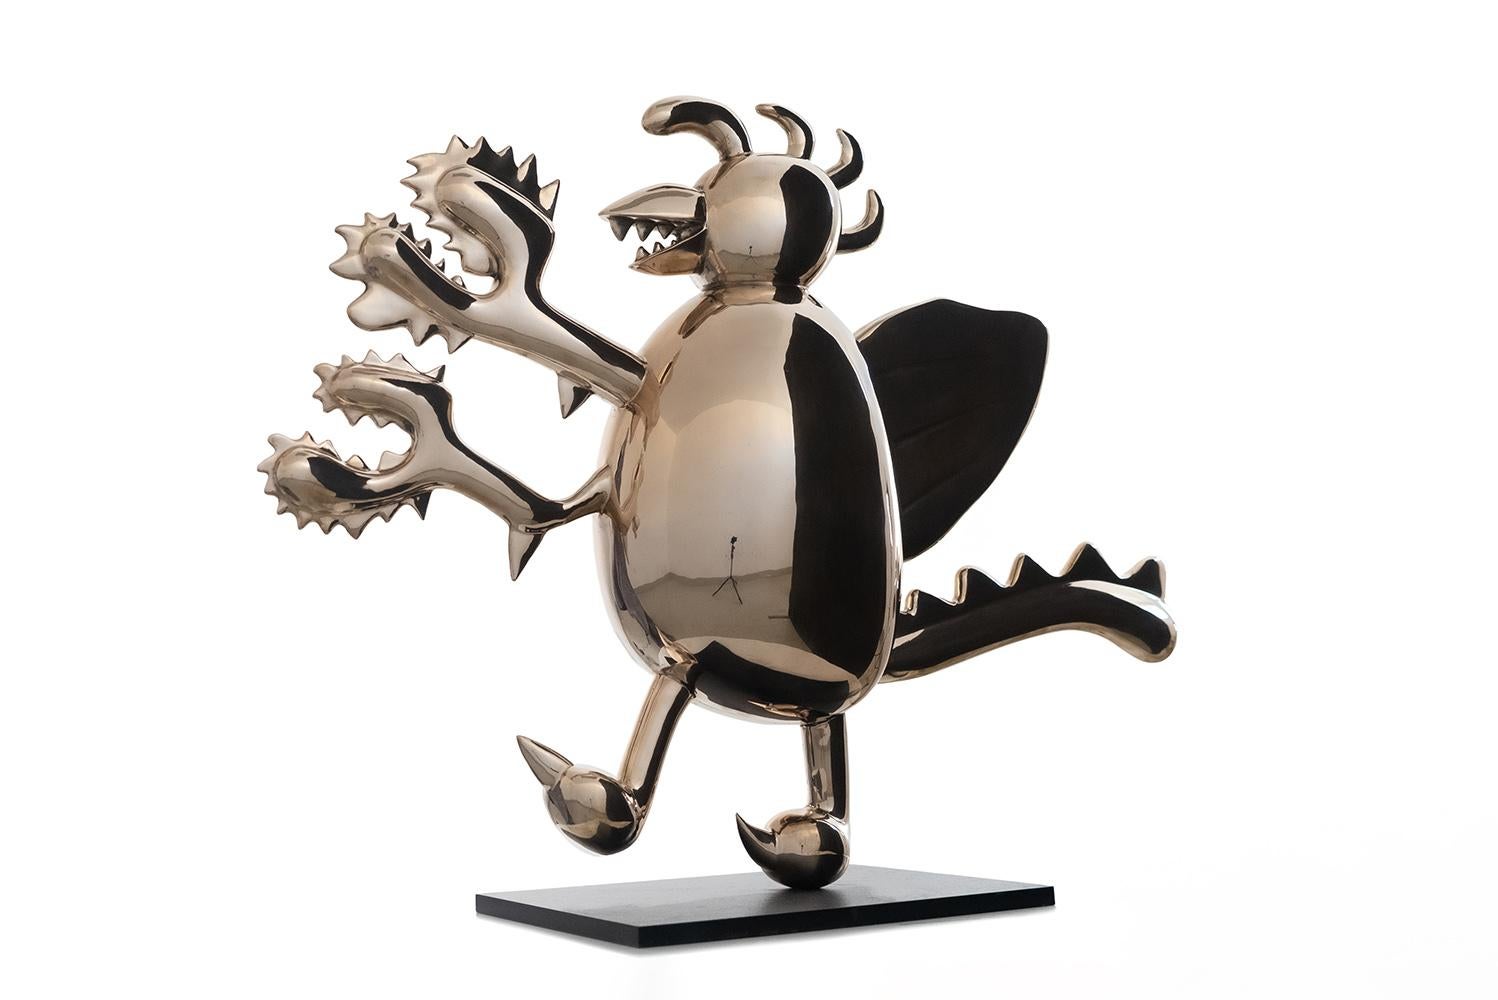 Nuke Duke is a polished bronze sculpture by contemporary artist Marcelo Martin Burgos, dimensions are 70 × 92 × 24 cm (27.6 × 36.2 × 9.4 in). 
The sculpture is signed and numbered, it is part of a limited edition of 12 editions, and comes with a